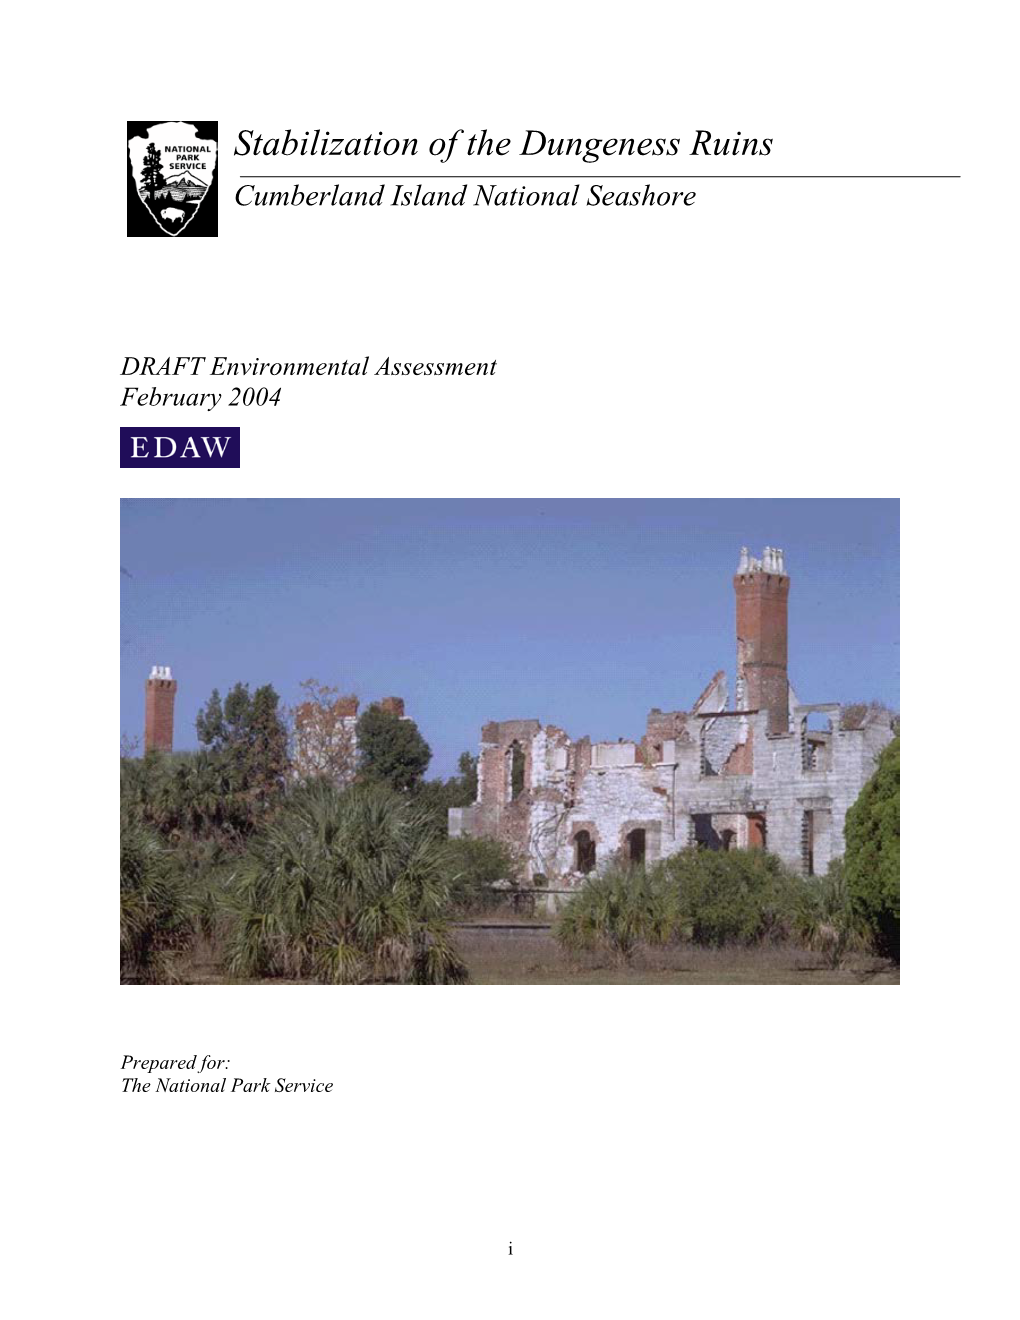 Stabilization of the Dungeness Ruins Environmental Assessment 2004